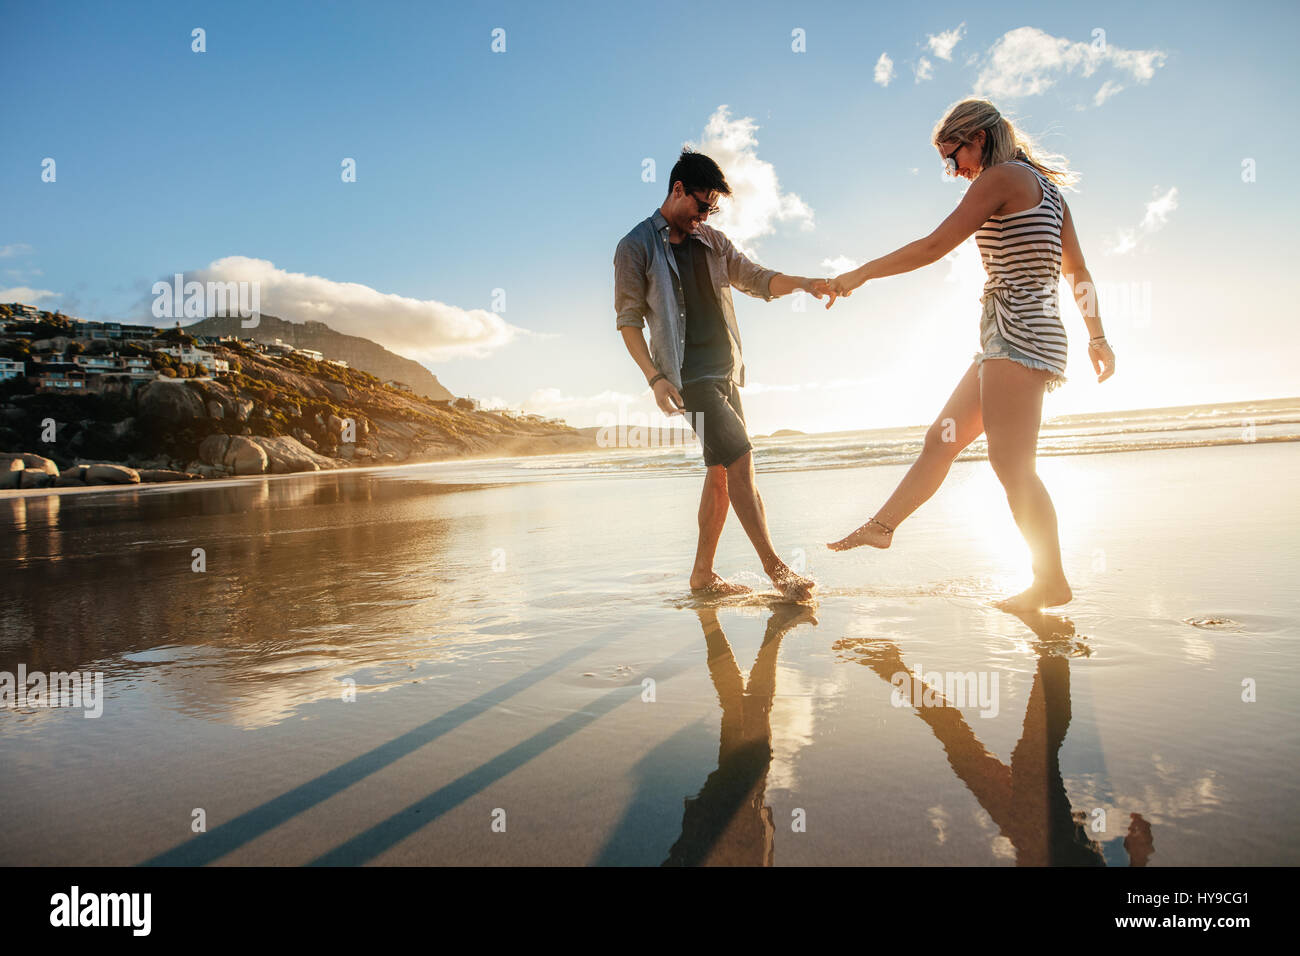 Beautiful young couple holding hands and playing on the shore. Happy young romantic couple in love having fun on beach. Stock Photo